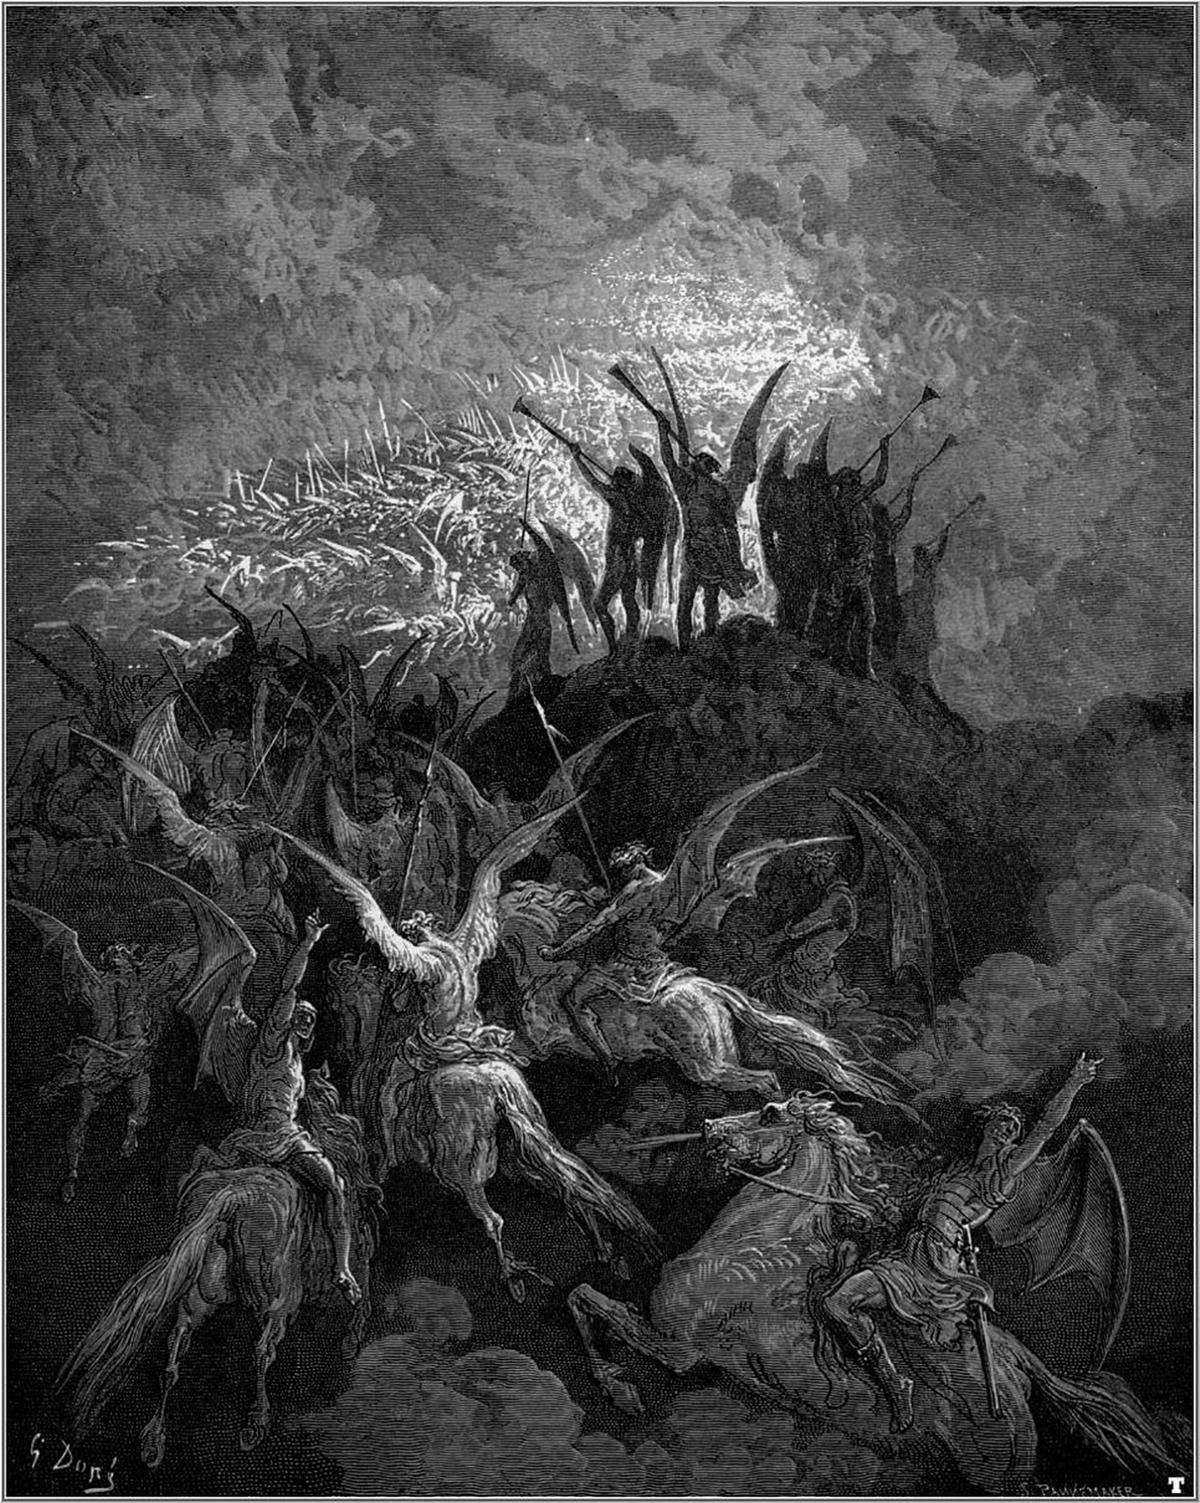 “Their summons called/ From every band and squared regiment/ By place or choice the worthiest,” 1866, by Gustav Doré for John Milton’s “Paradise Lost.” Engraving. (Public Domain)